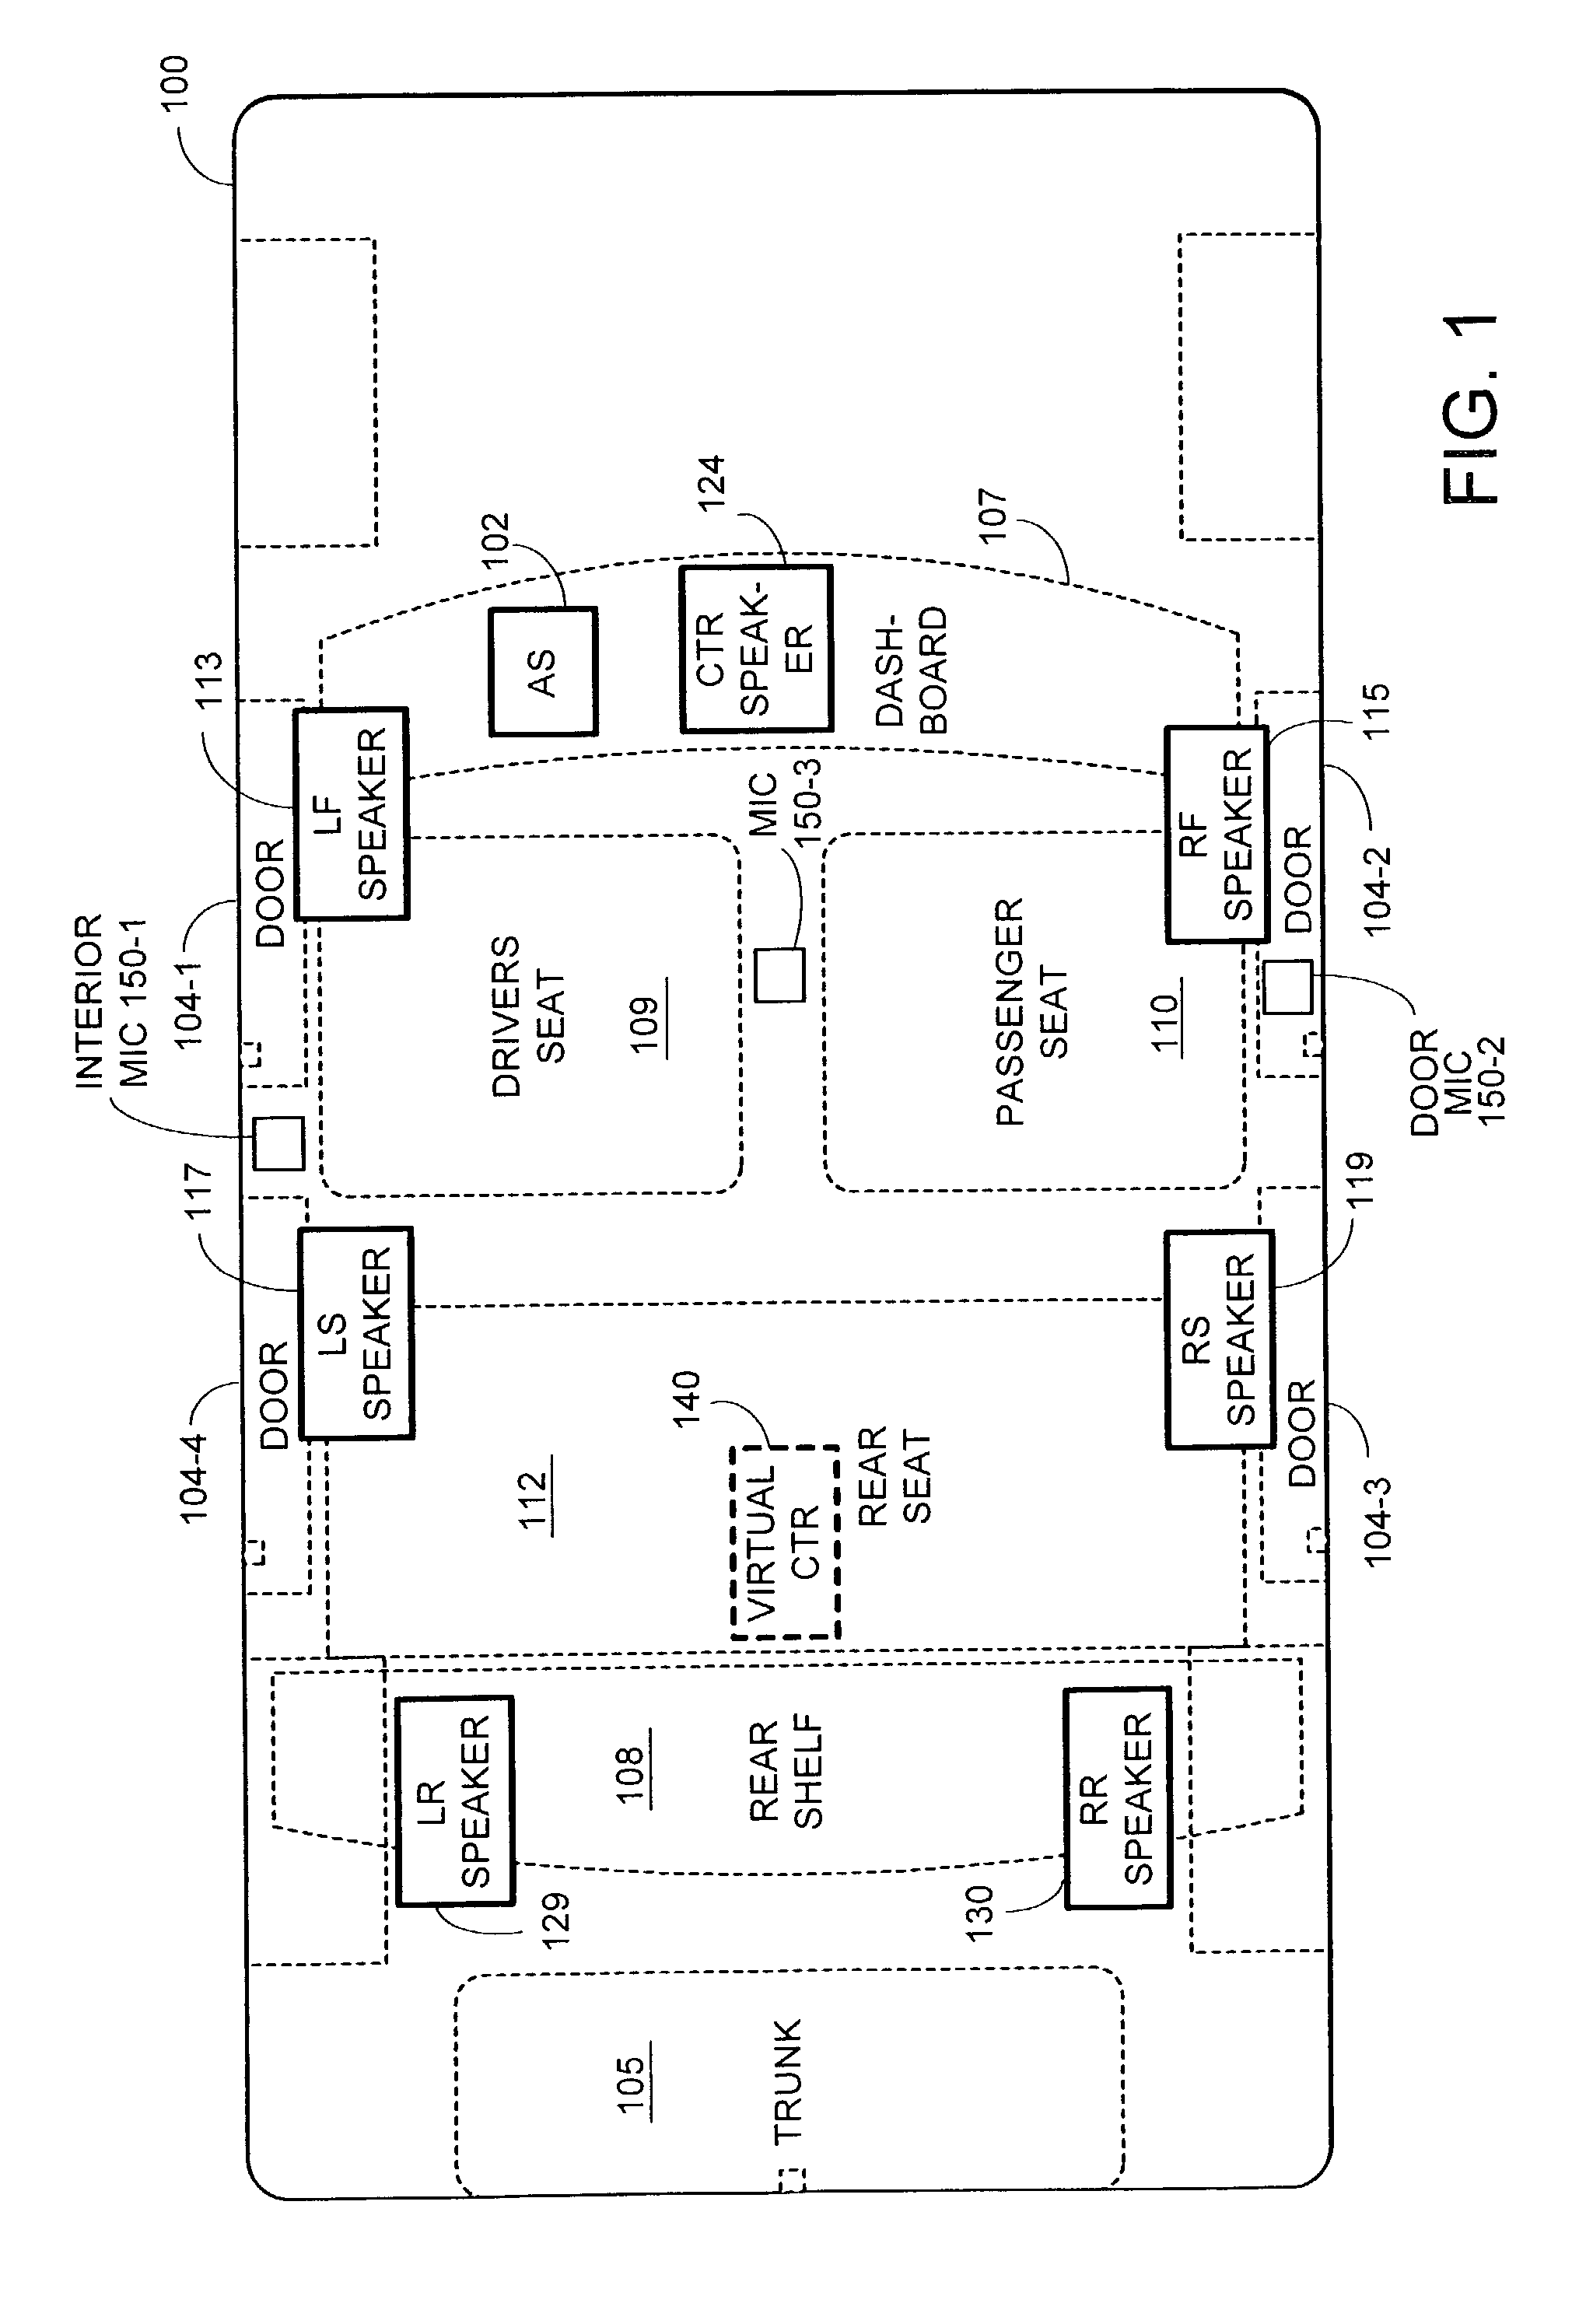 Sound processing system using spatial imaging techniques